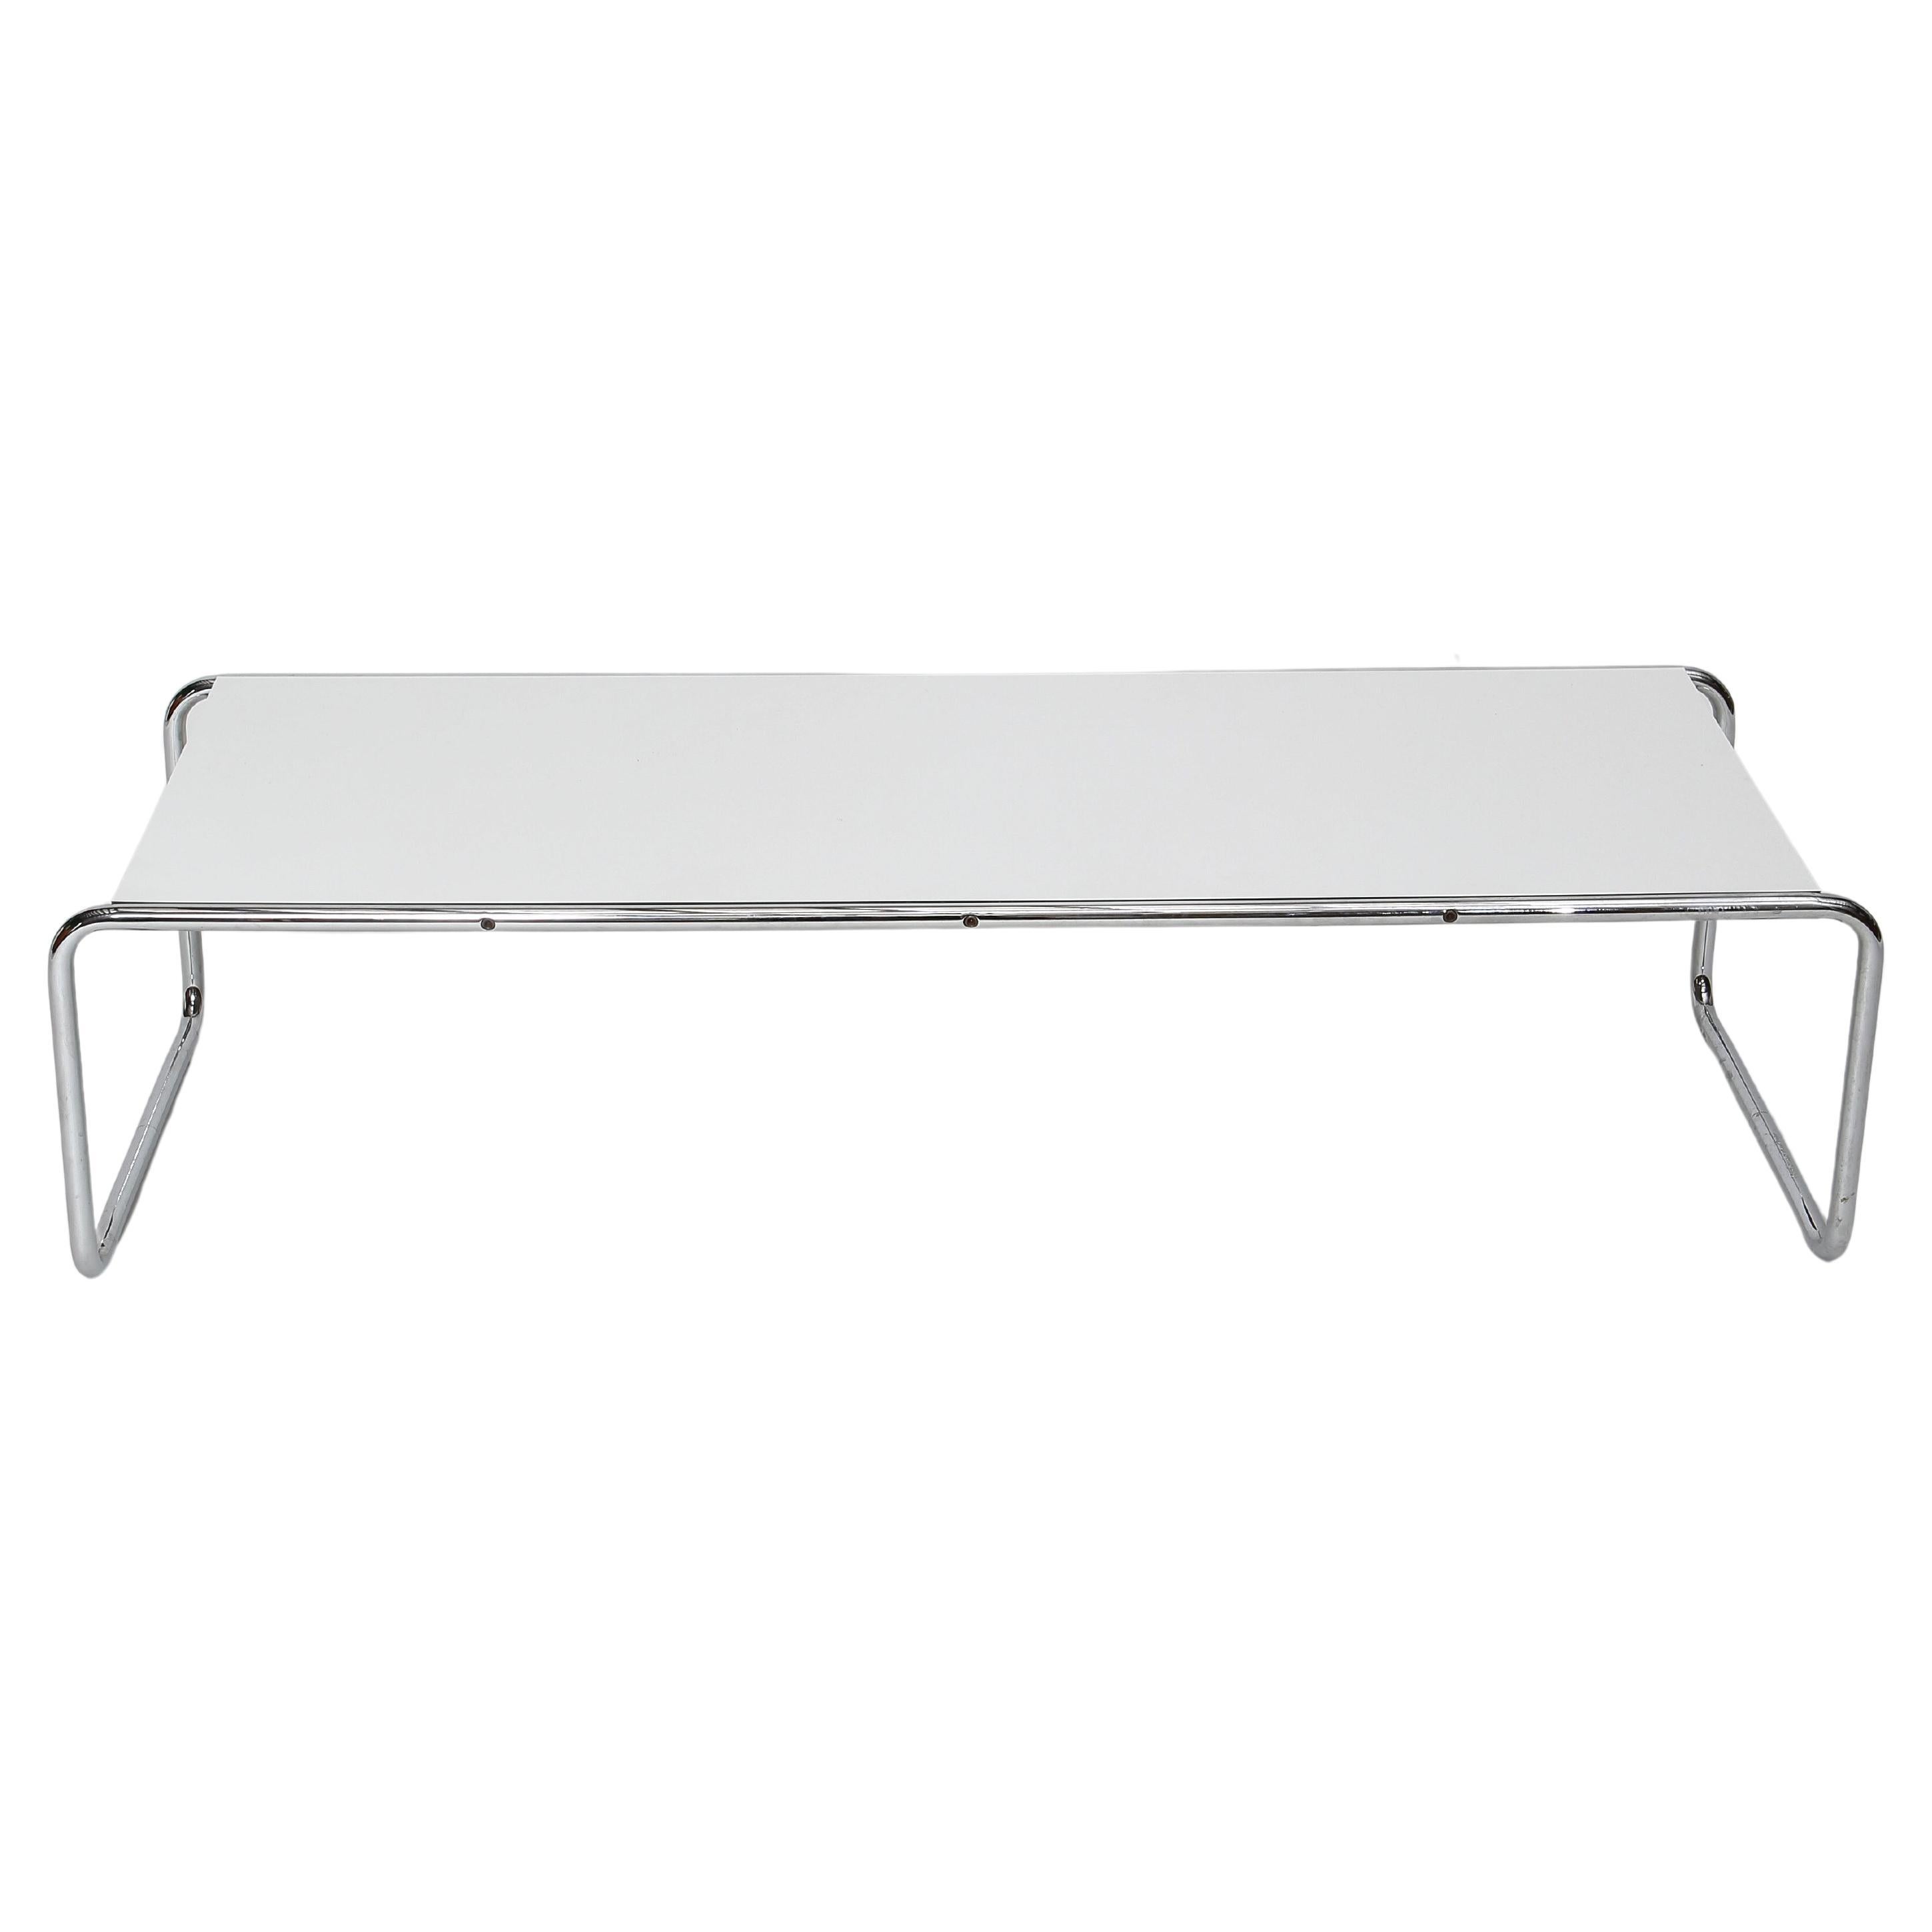 “Laccio�” Coffee Table by Marcel Breuer for Knoll